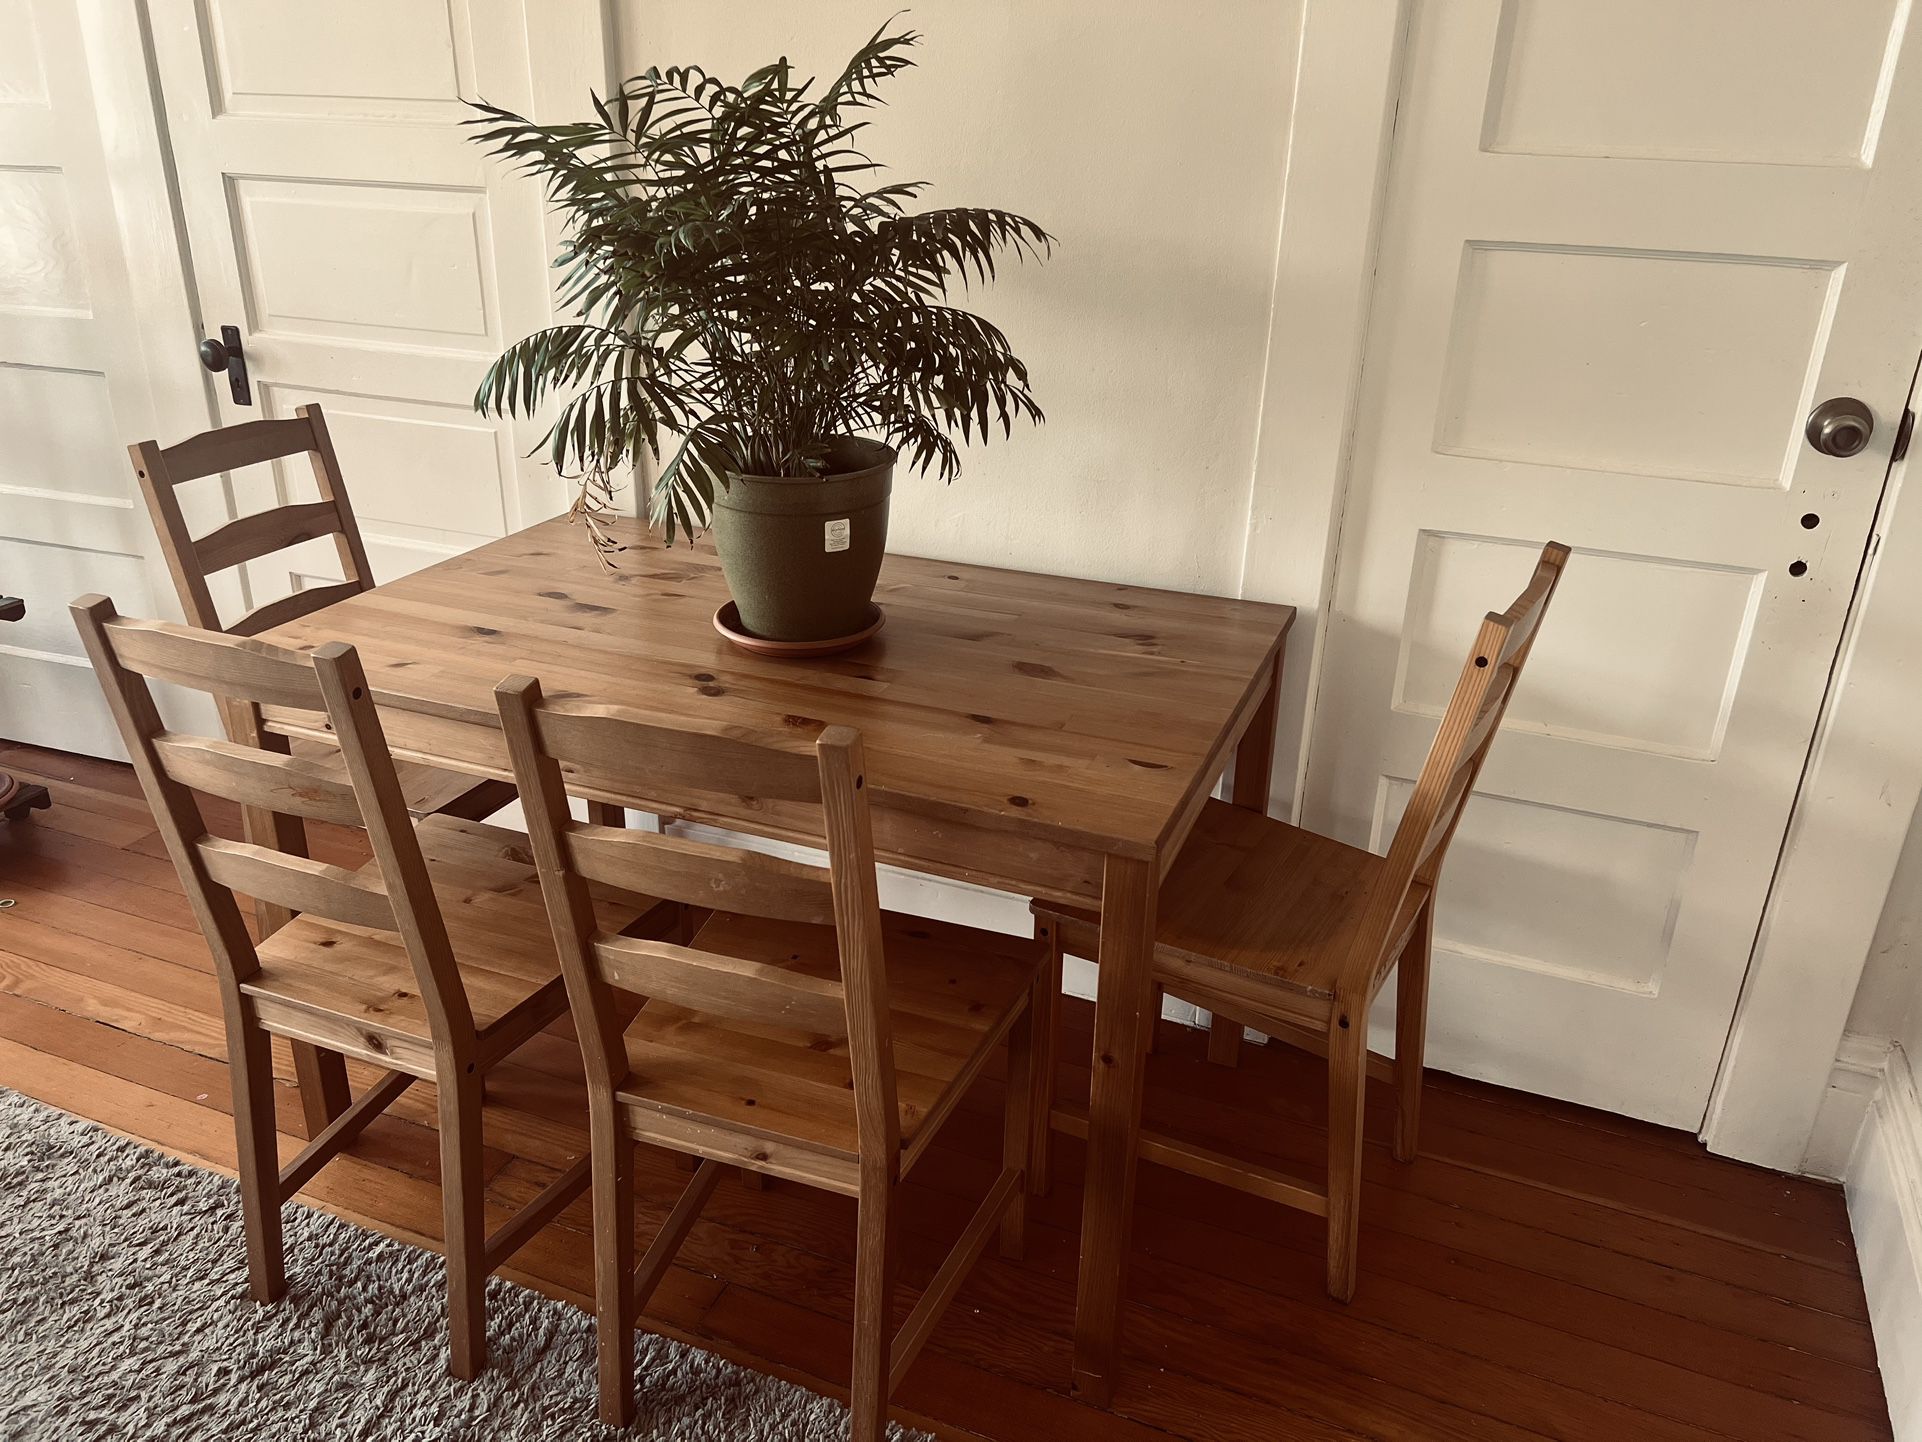 4 Chair IKEA Wood Finish Dining Table 